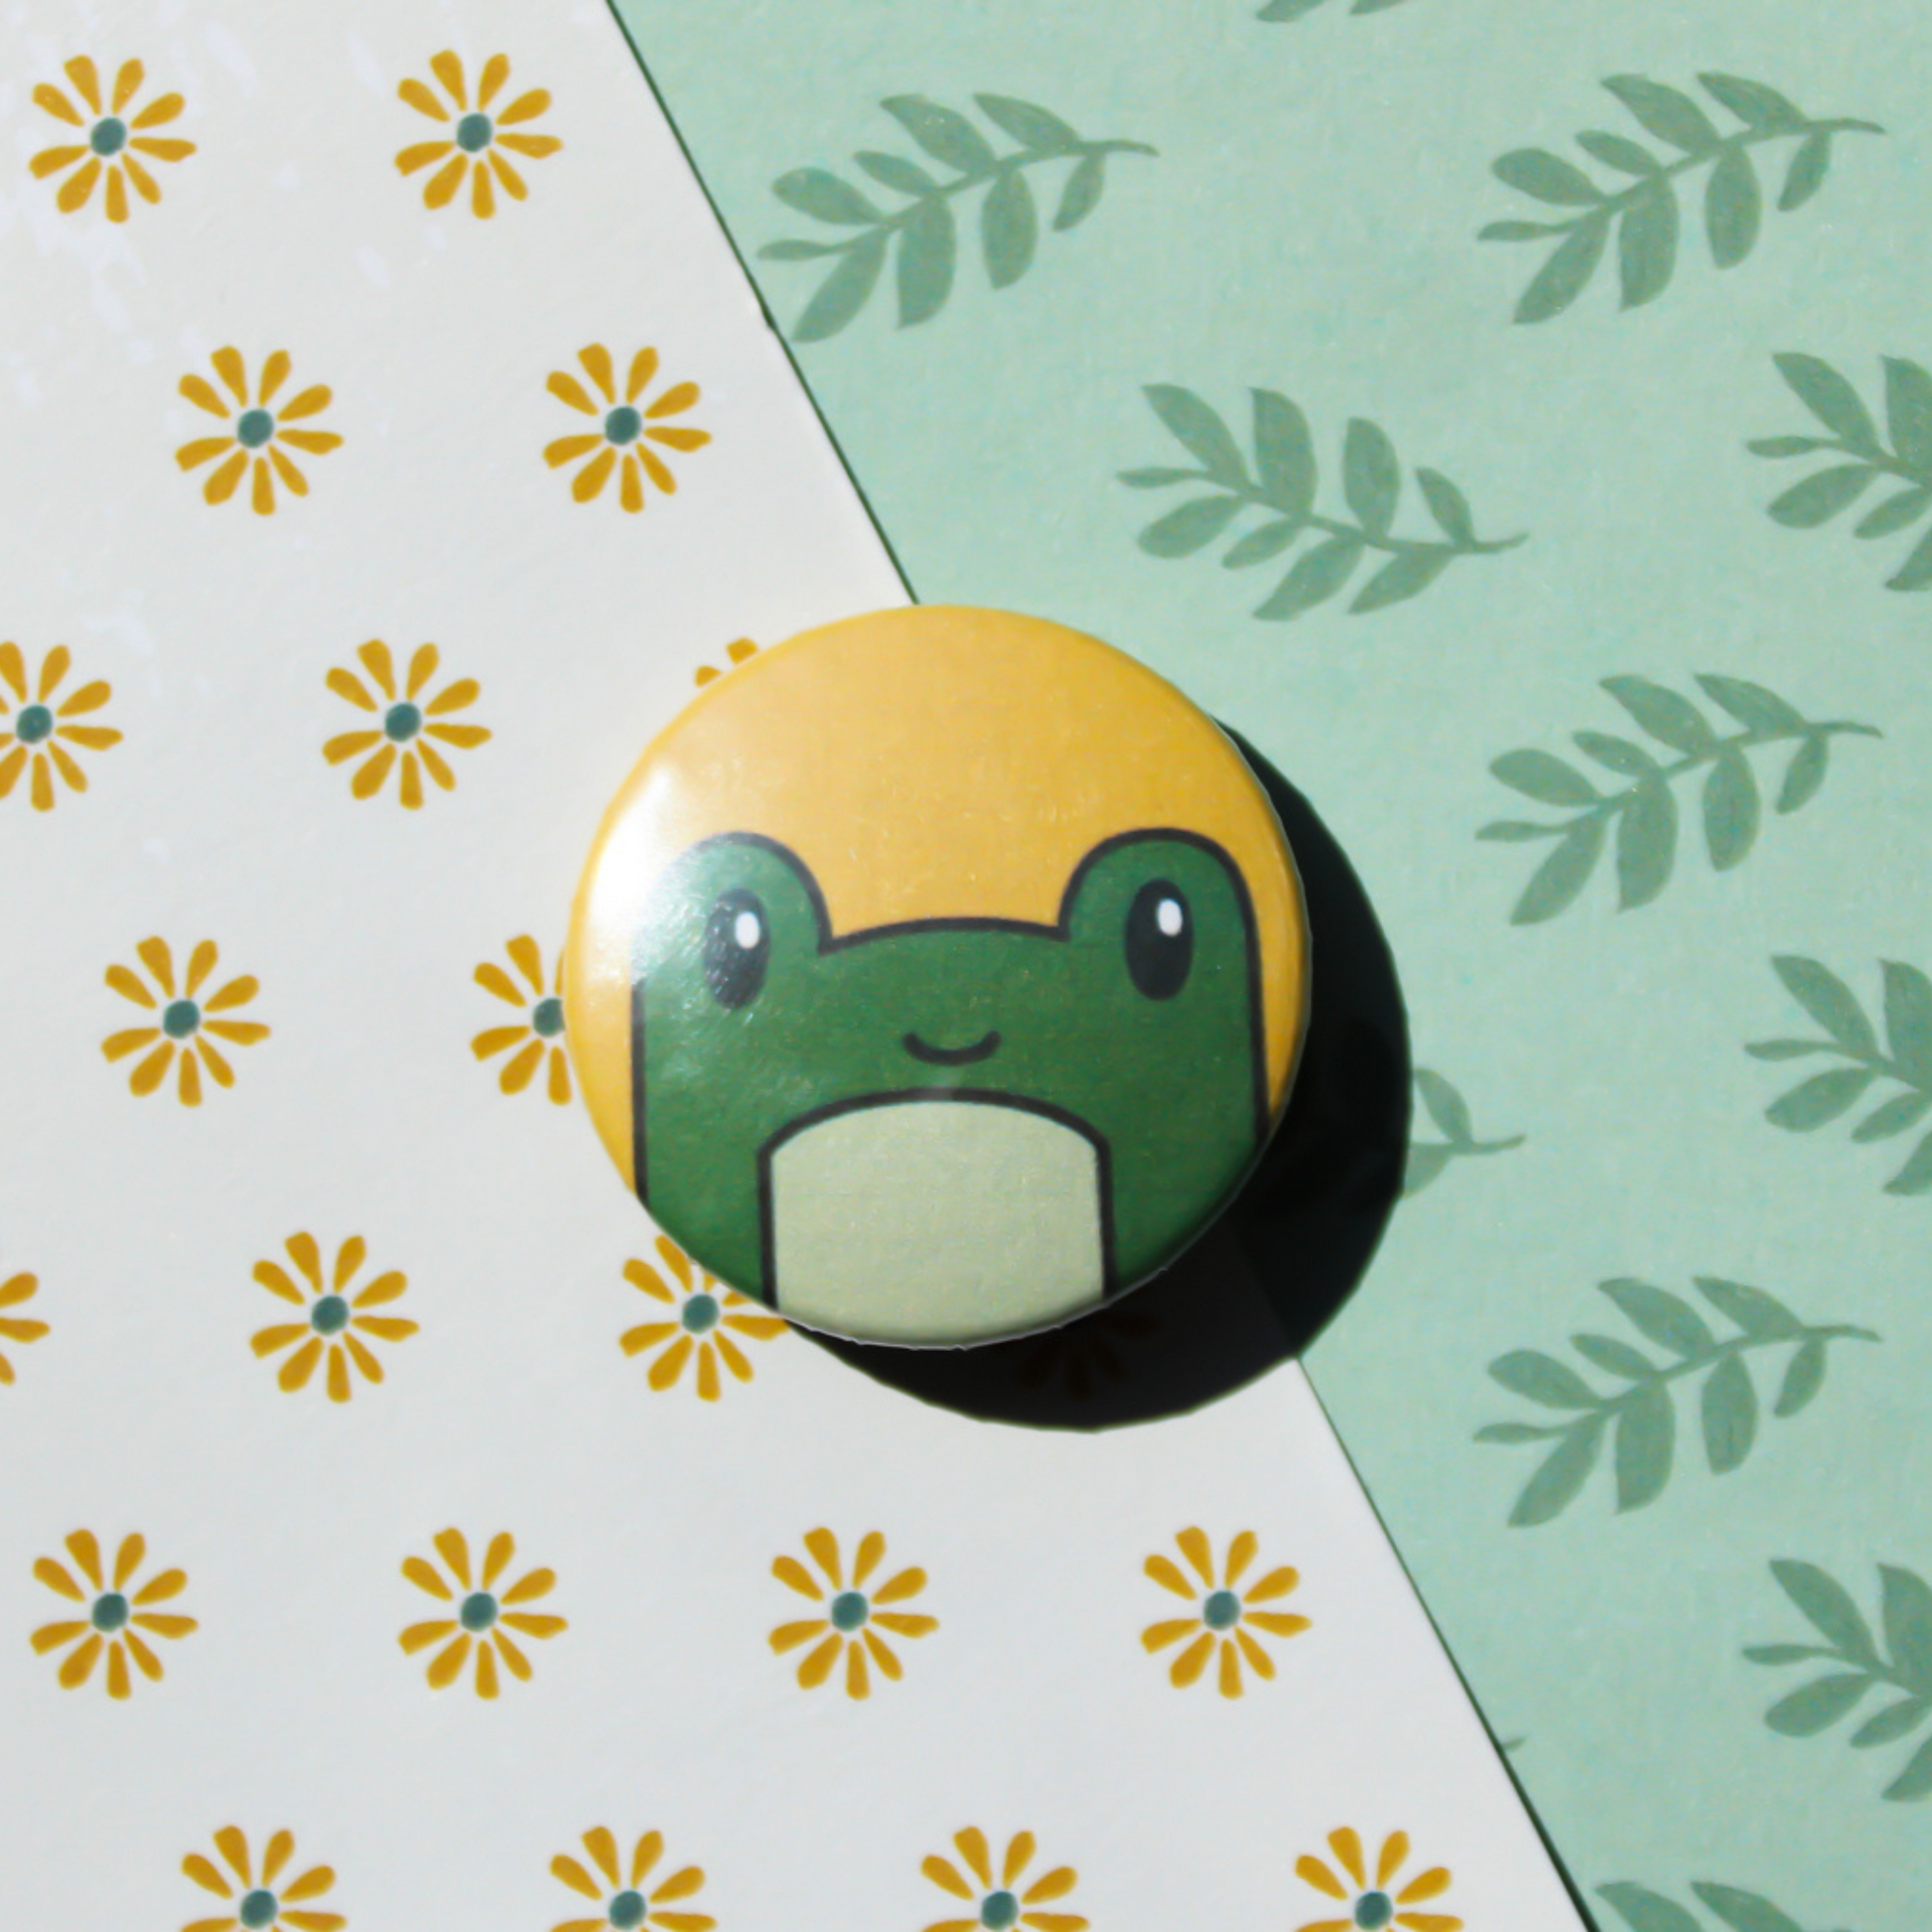 A leaf and flower pattern background. On top is a yellow circle pin with a green cartoon frog's head smiling.